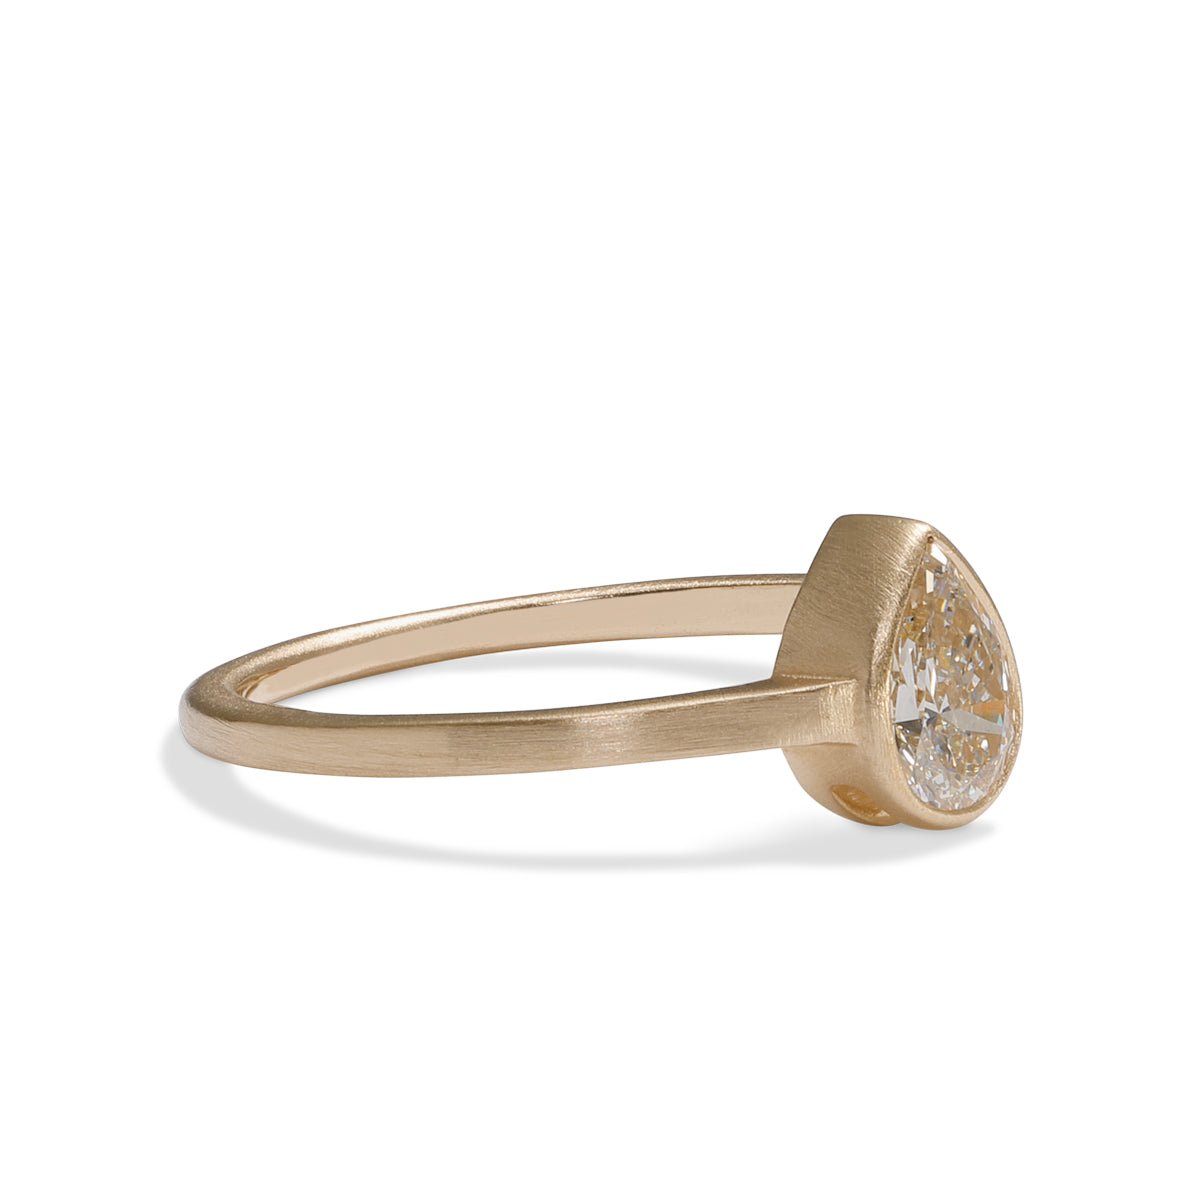 Modern pear shaped Votum ring from Betsy & Iya. With a 14K gold band and lab-grown diamond (0.5 ct).